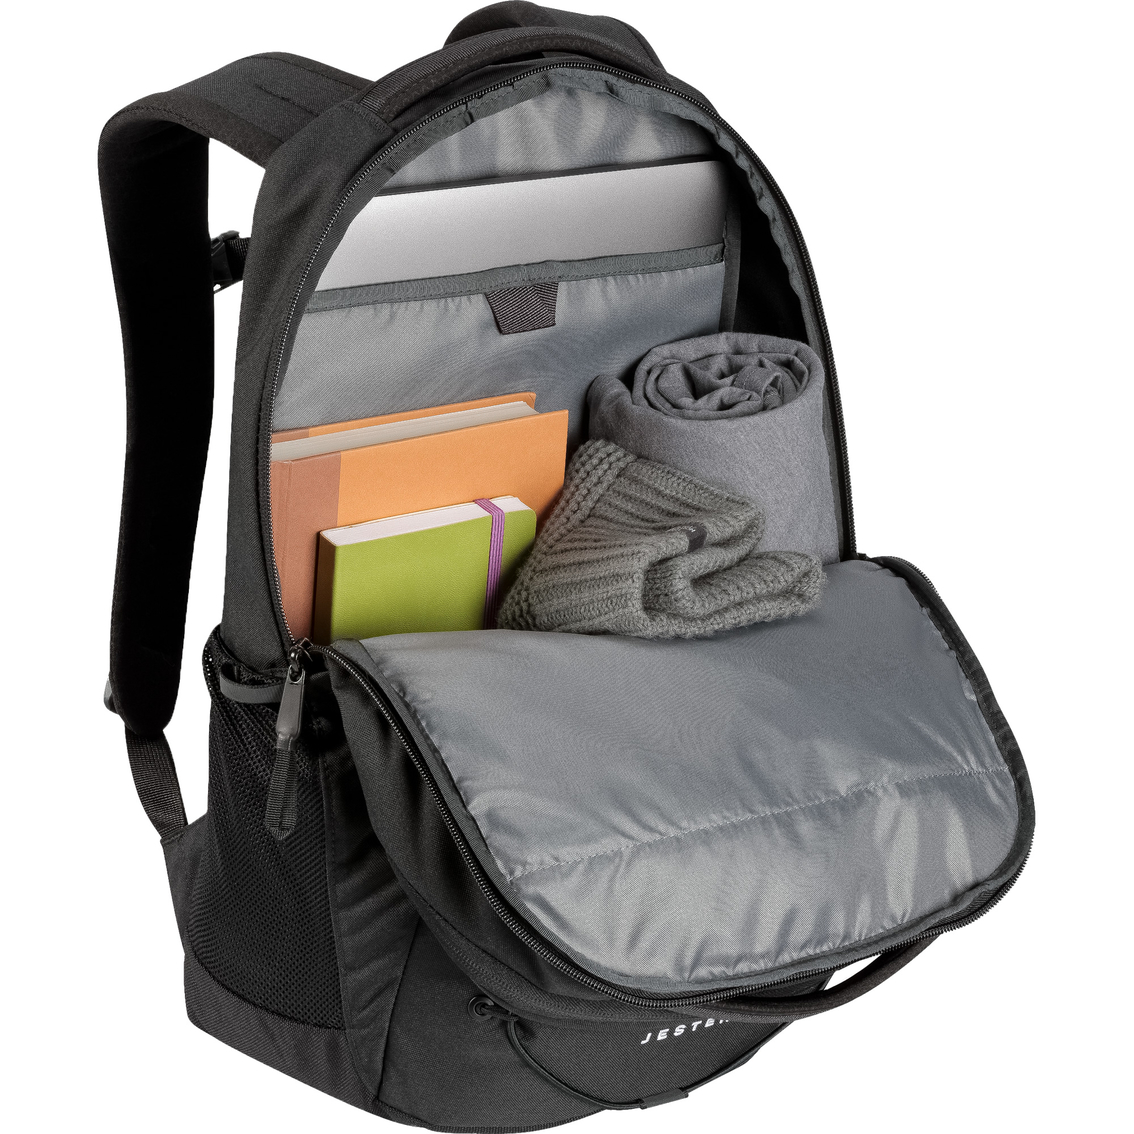 The North Face Jester Daypack - Image 4 of 5